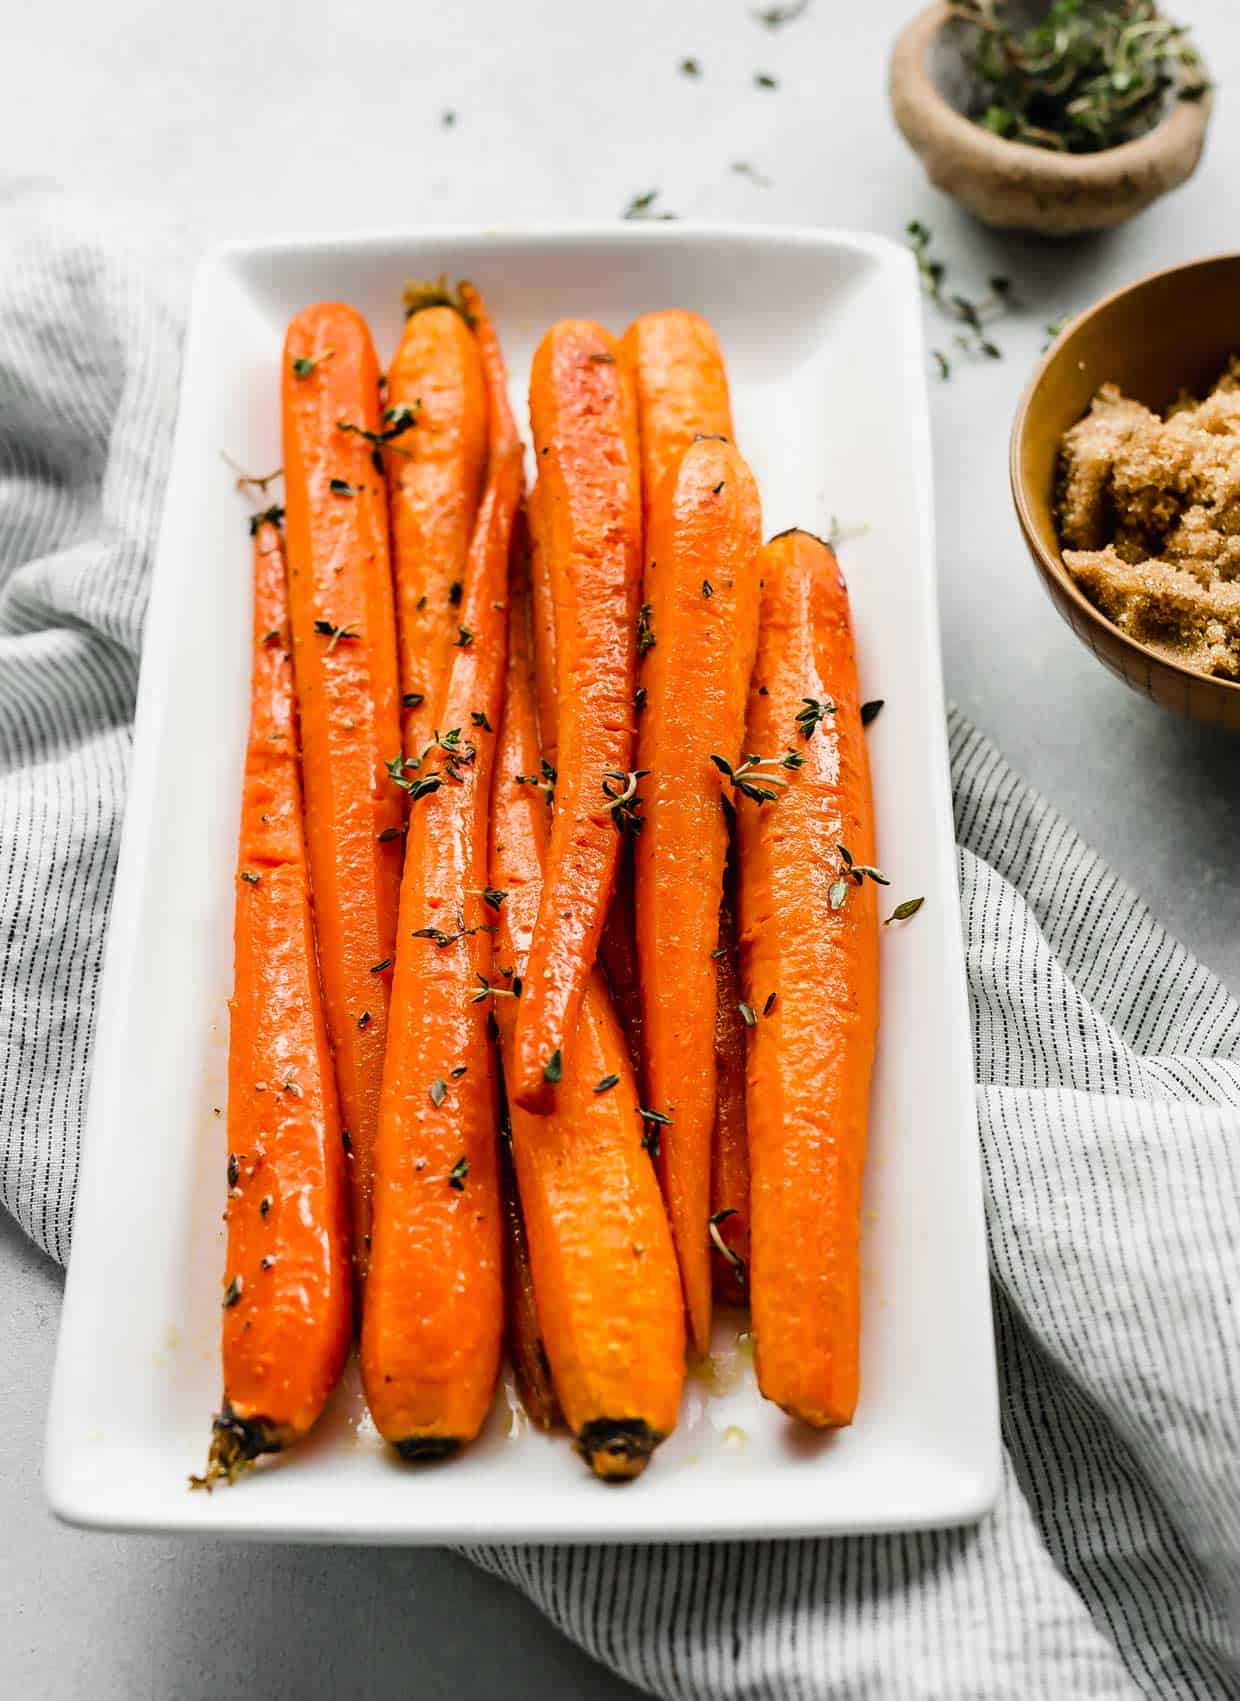 Brown Sugar Roasted Carrots topped with fresh thyme on a white plate.